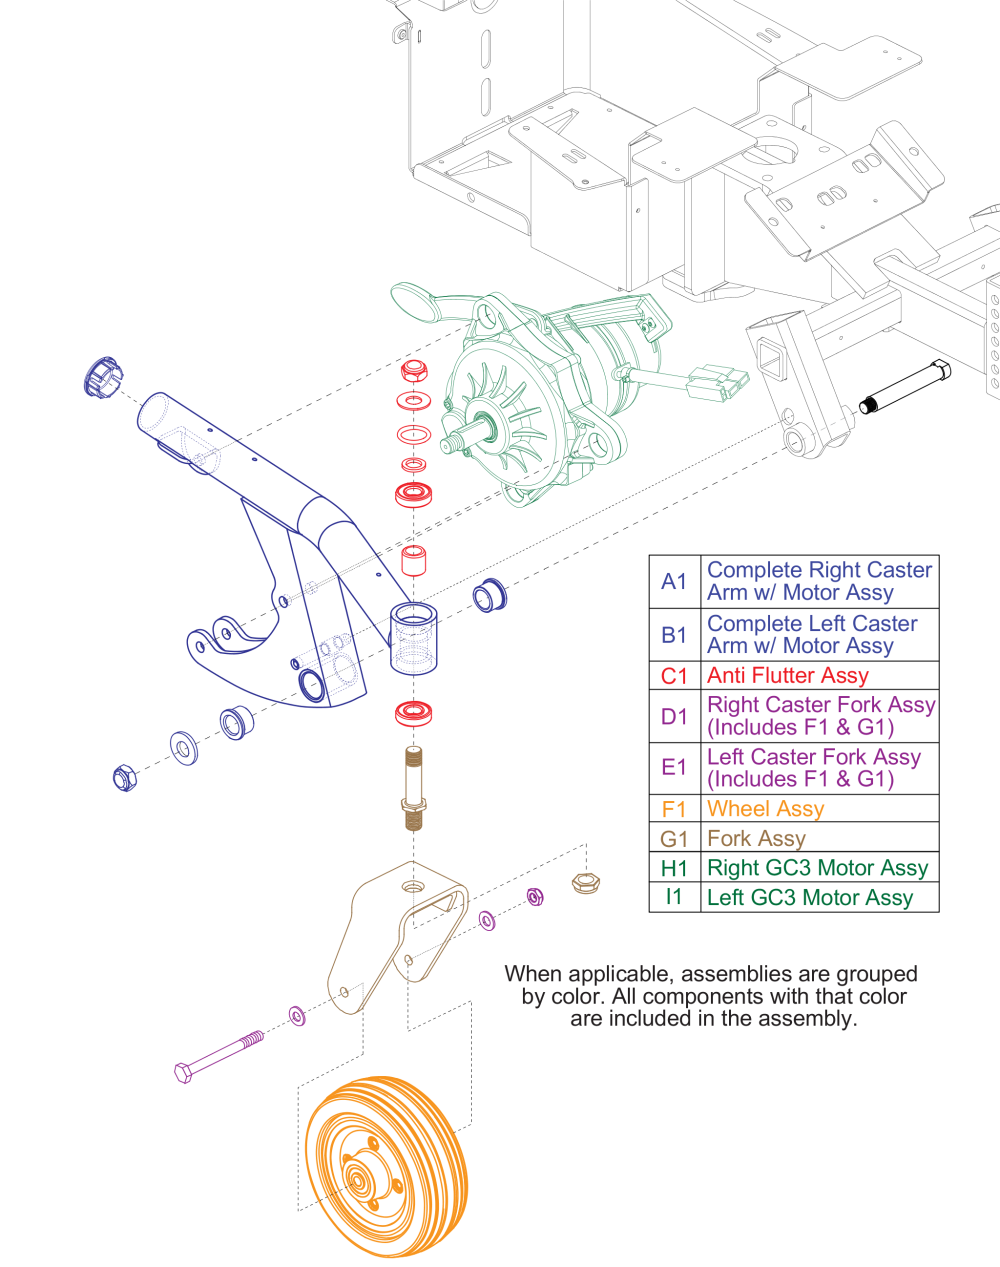 Used On Or After The 174 Day Of 2009, J9217409001c30 parts diagram